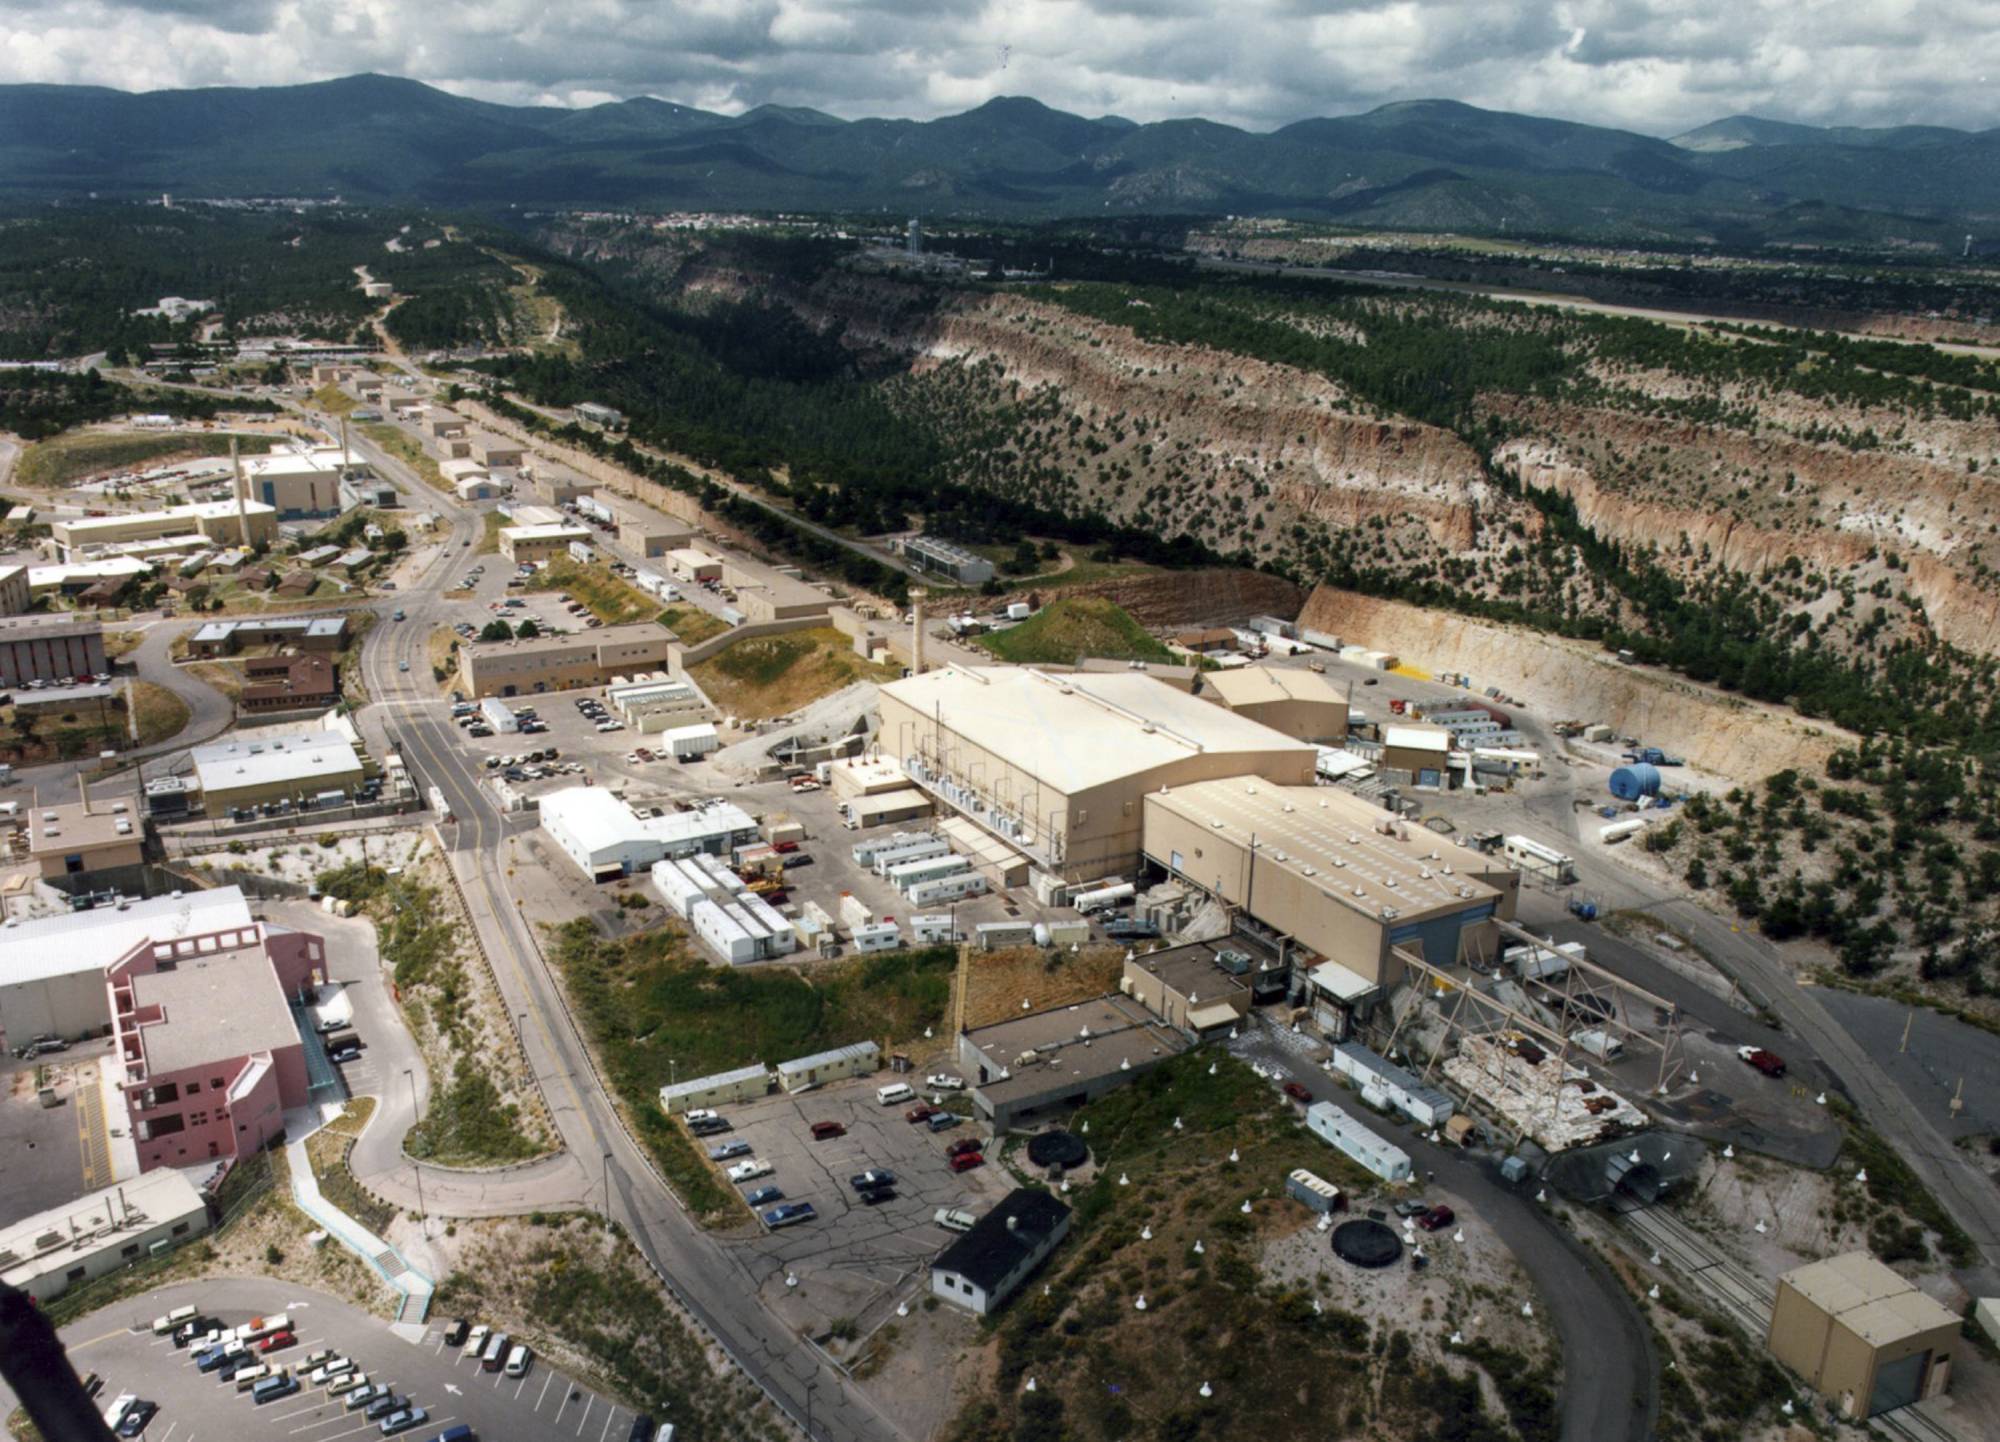 This undated aerial photo shows the Los Alamos National laboratory in Los Alamos, N.M. The federal agency that oversees the nation's nuclear weapons stockpile is expected this week to release a report on the best site option for the United States as it looks to ramp up production of the plutonium cores that trigger nuclear warheads. The contenders are the Los Alamos National Laboratory in New Mexico and the Savannah River Site in South Carolina. At stake are hundreds of jobs and billions of dollars in federal funding to either revamp existing buildings or construct new factories. (The Albuquerque Journal via AP)